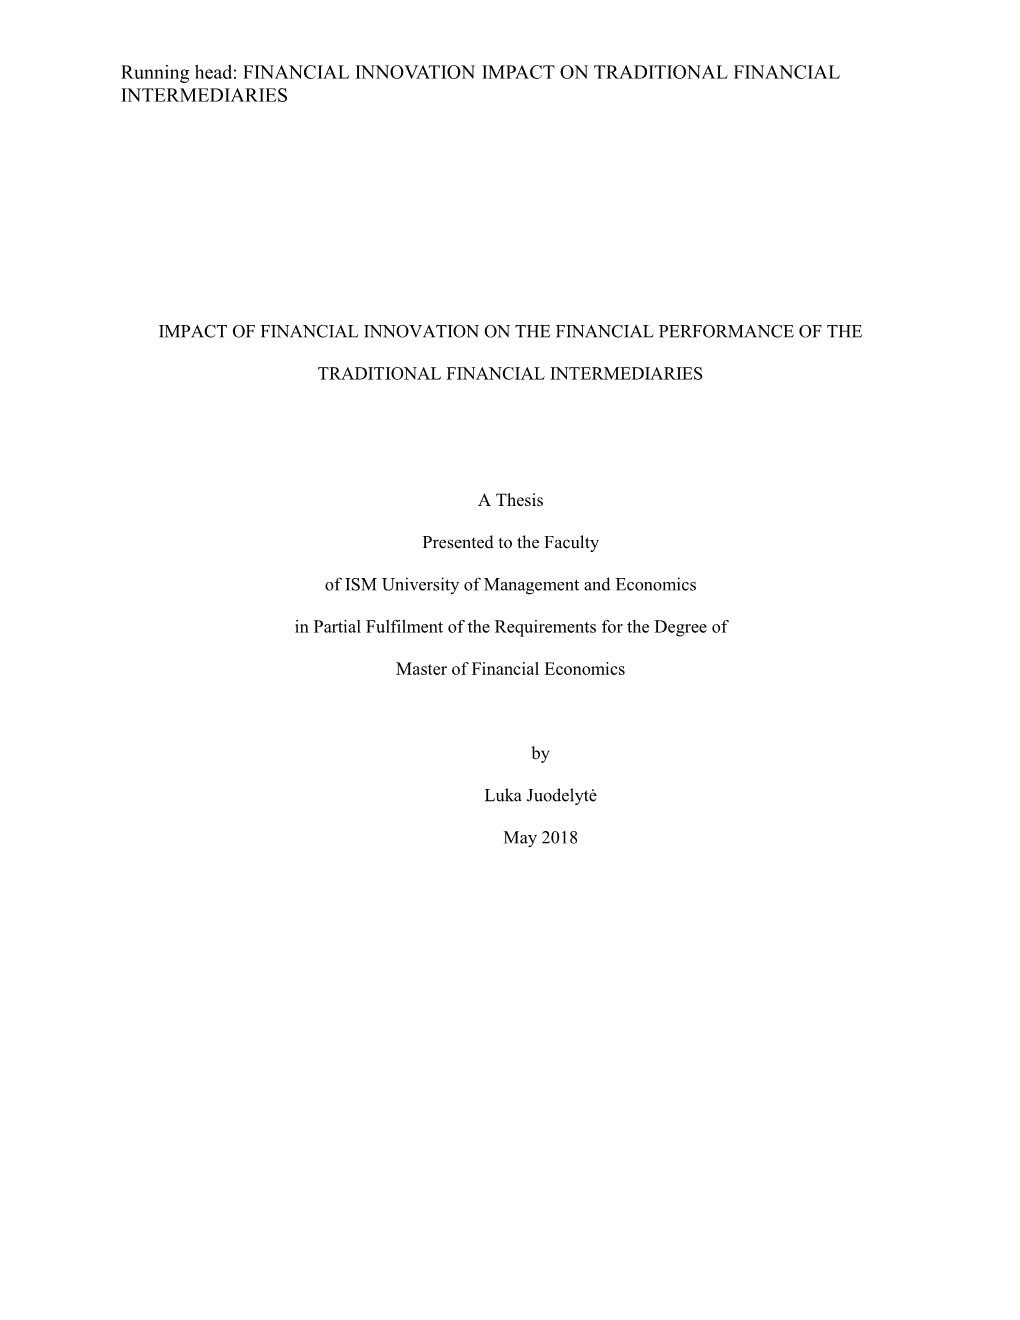 IMPACT of FINANCIAL INNOVATION on the FINANCIAL PERFORMANCE of the TRADITIONAL FINANCIAL INTERMEDIARIES a Thesis Presented To